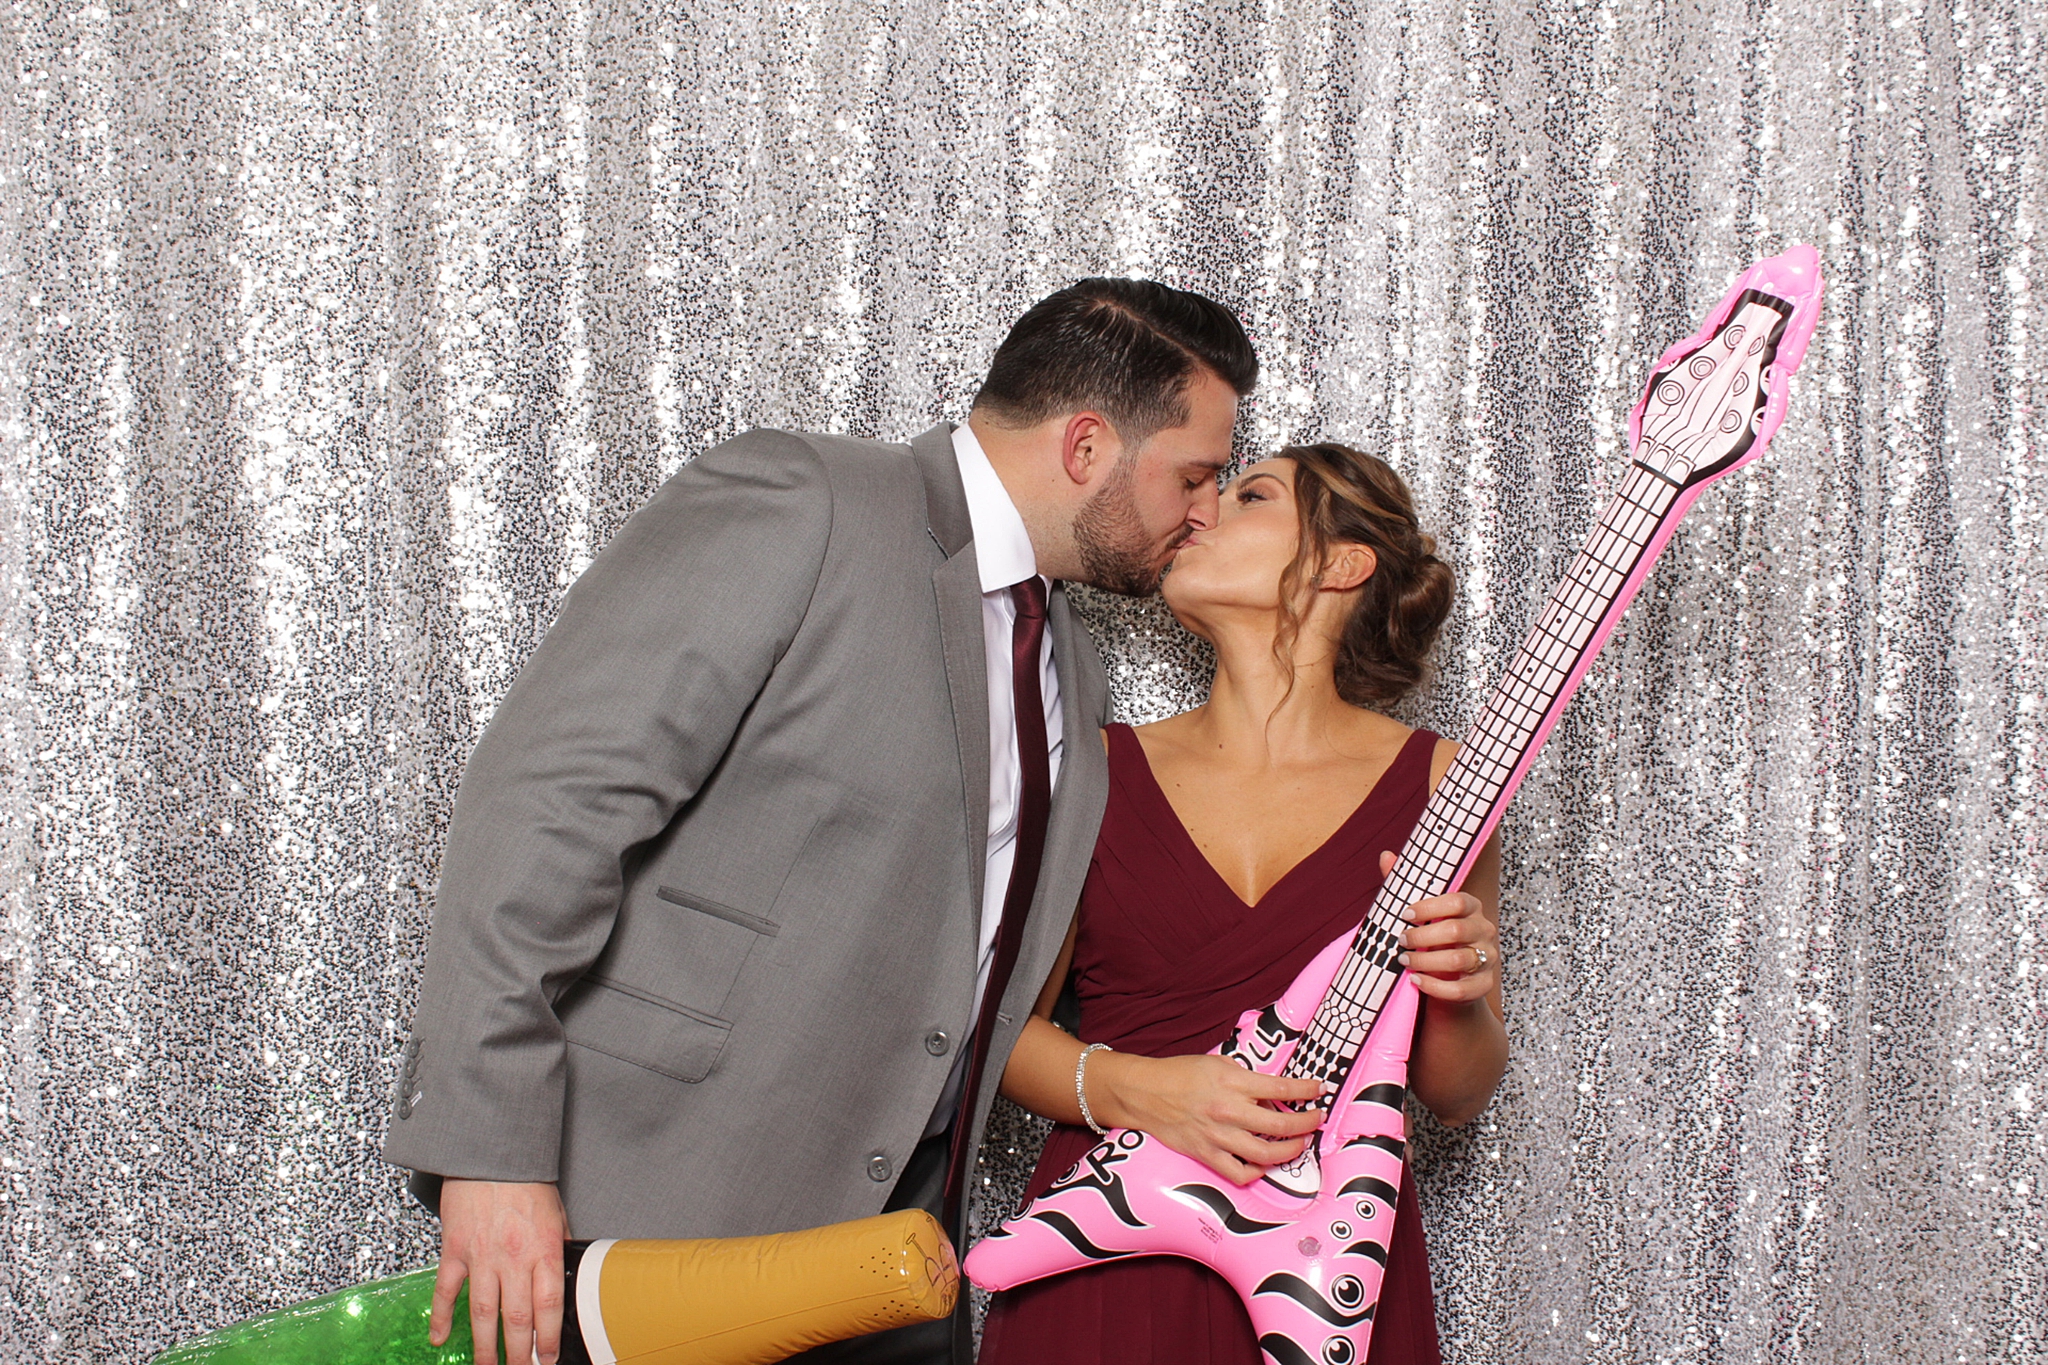 wedding guests kiss in photo booth with inflatable guitar